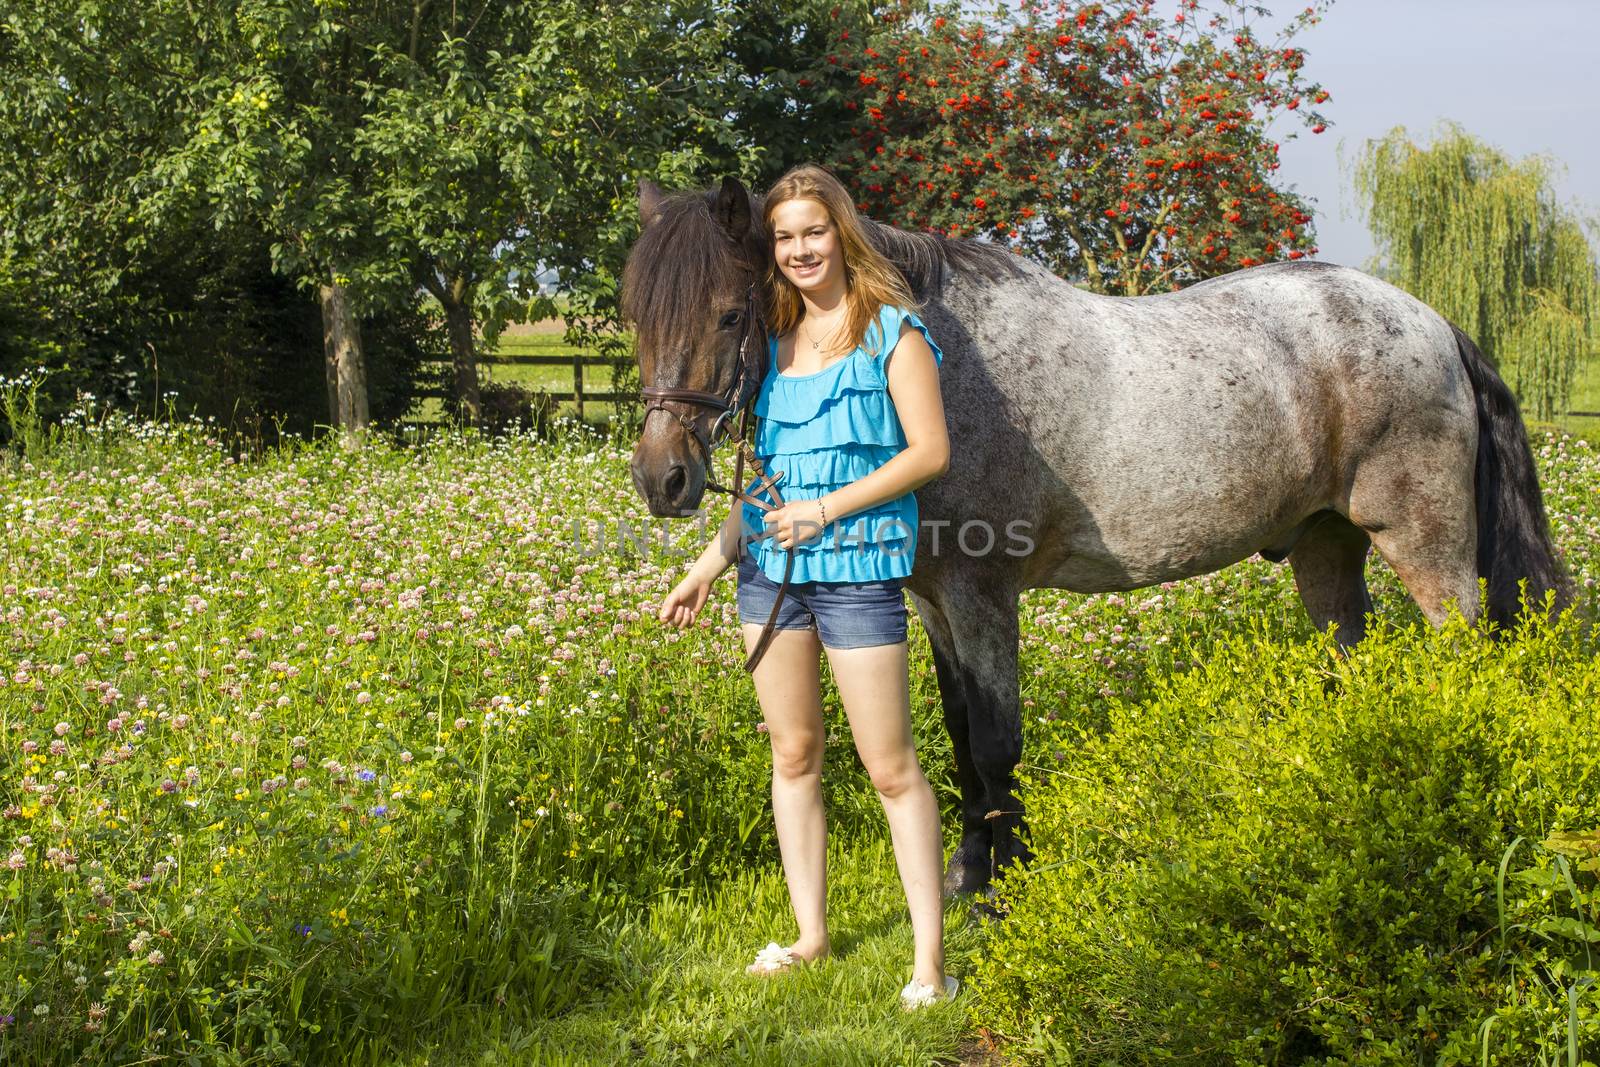 young girl and her horse by miradrozdowski